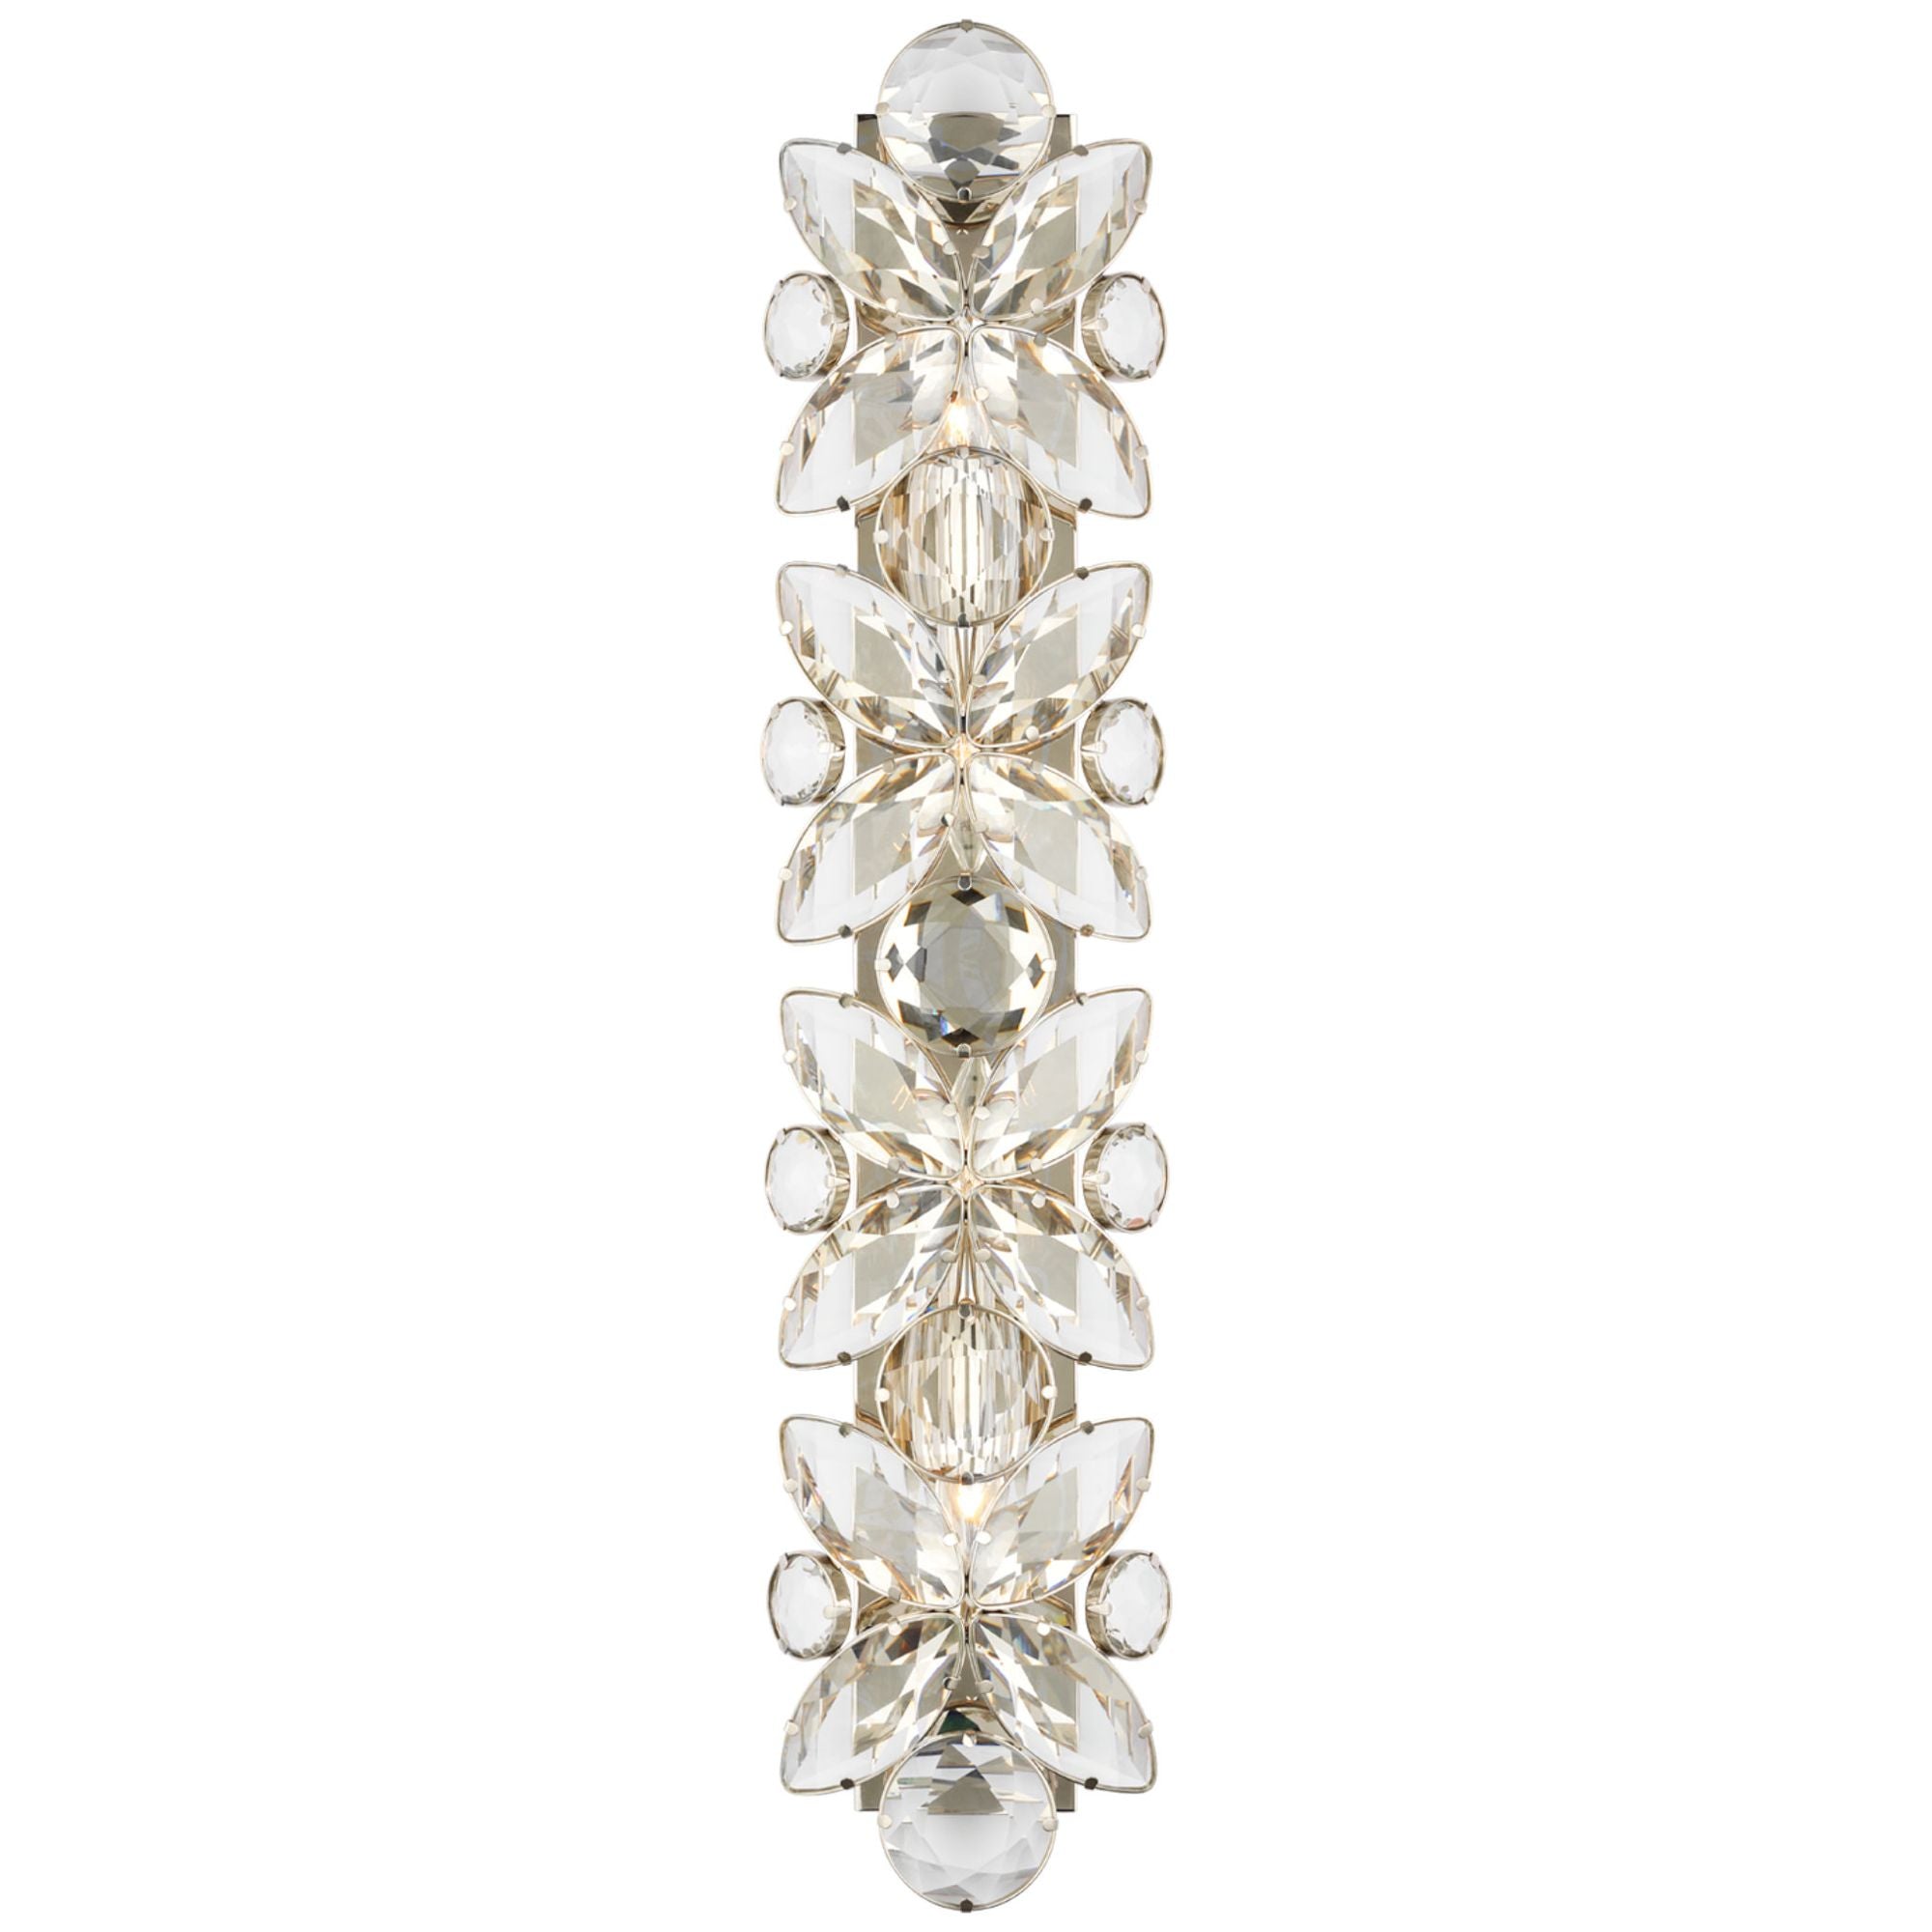 kate spade new york Lloyd 33" Sconce in Polished Nickel with Crystal